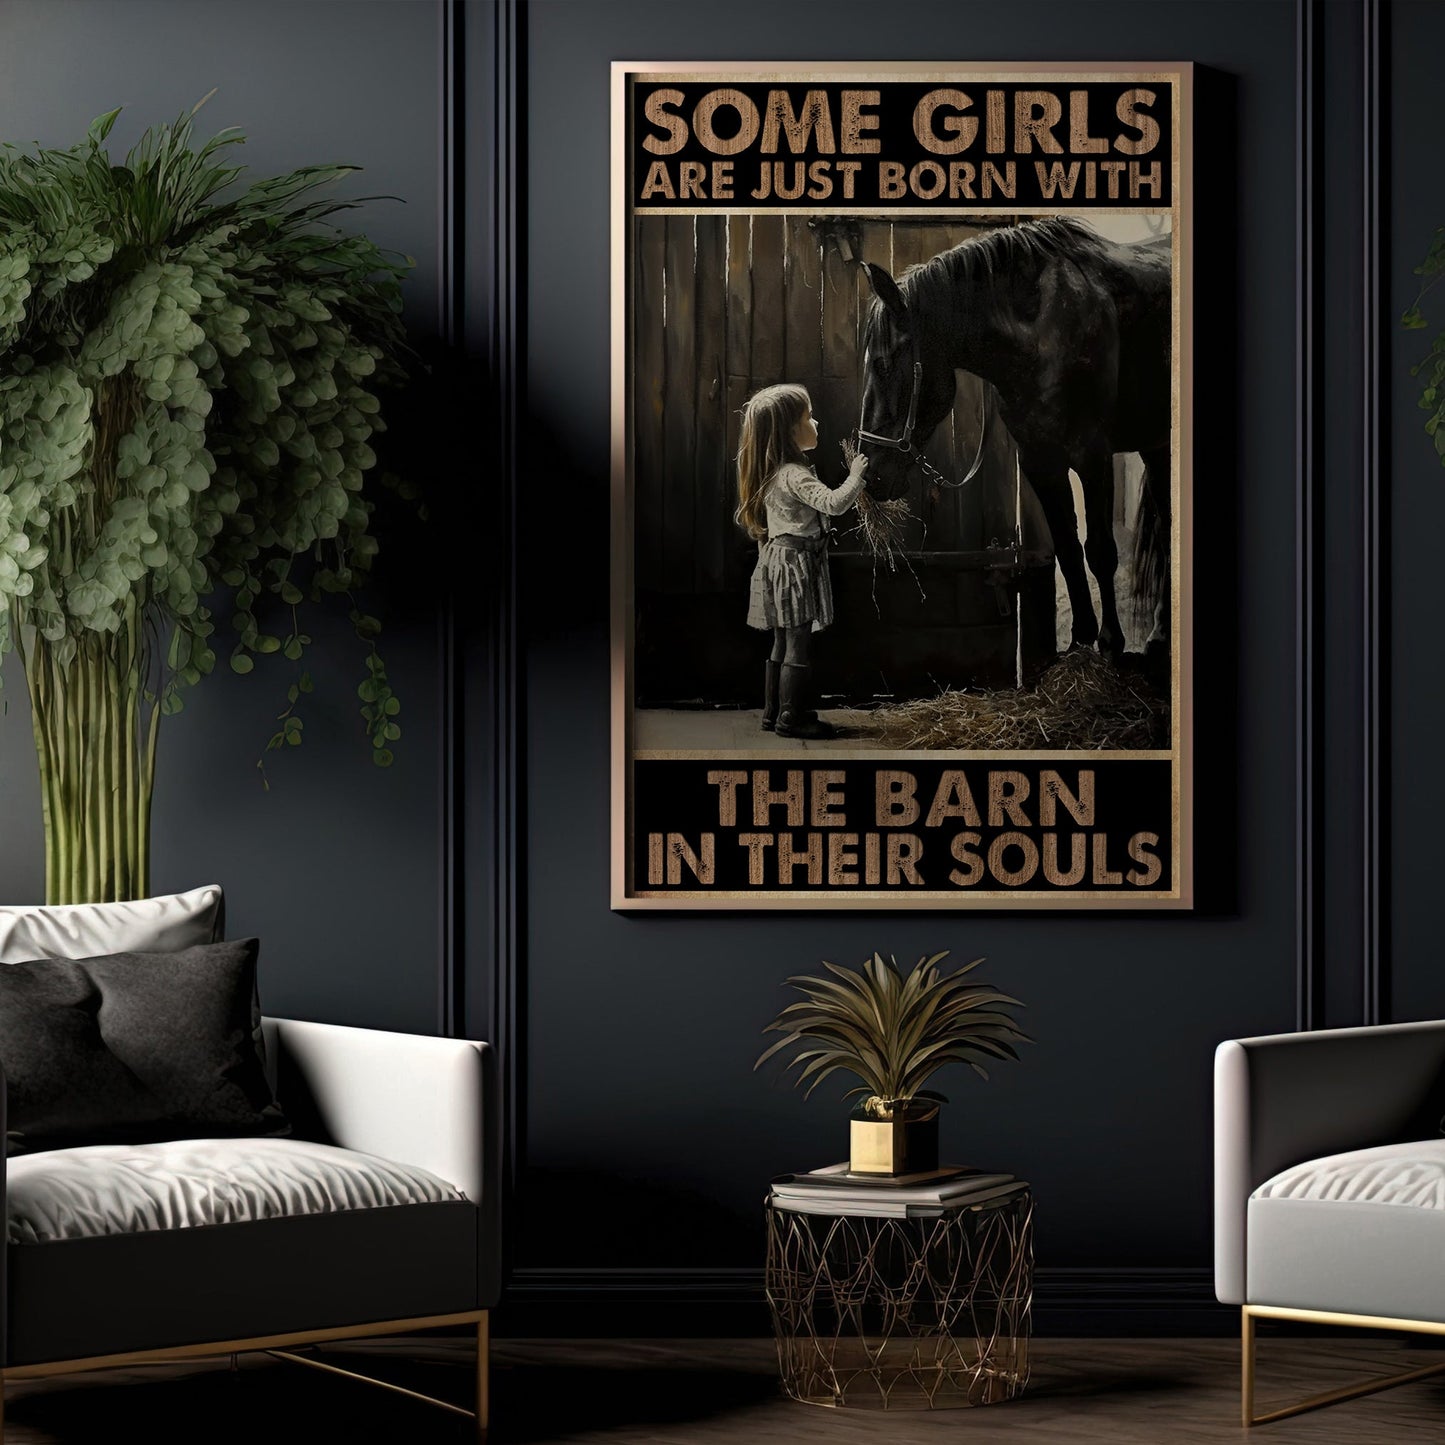 Some Girl Are Just Born With The Barn, Motivational Horse Girl Canvas Painting, Inspirational Quotes Wall Art Decor, Poster Gift For Horse Girl Lovers